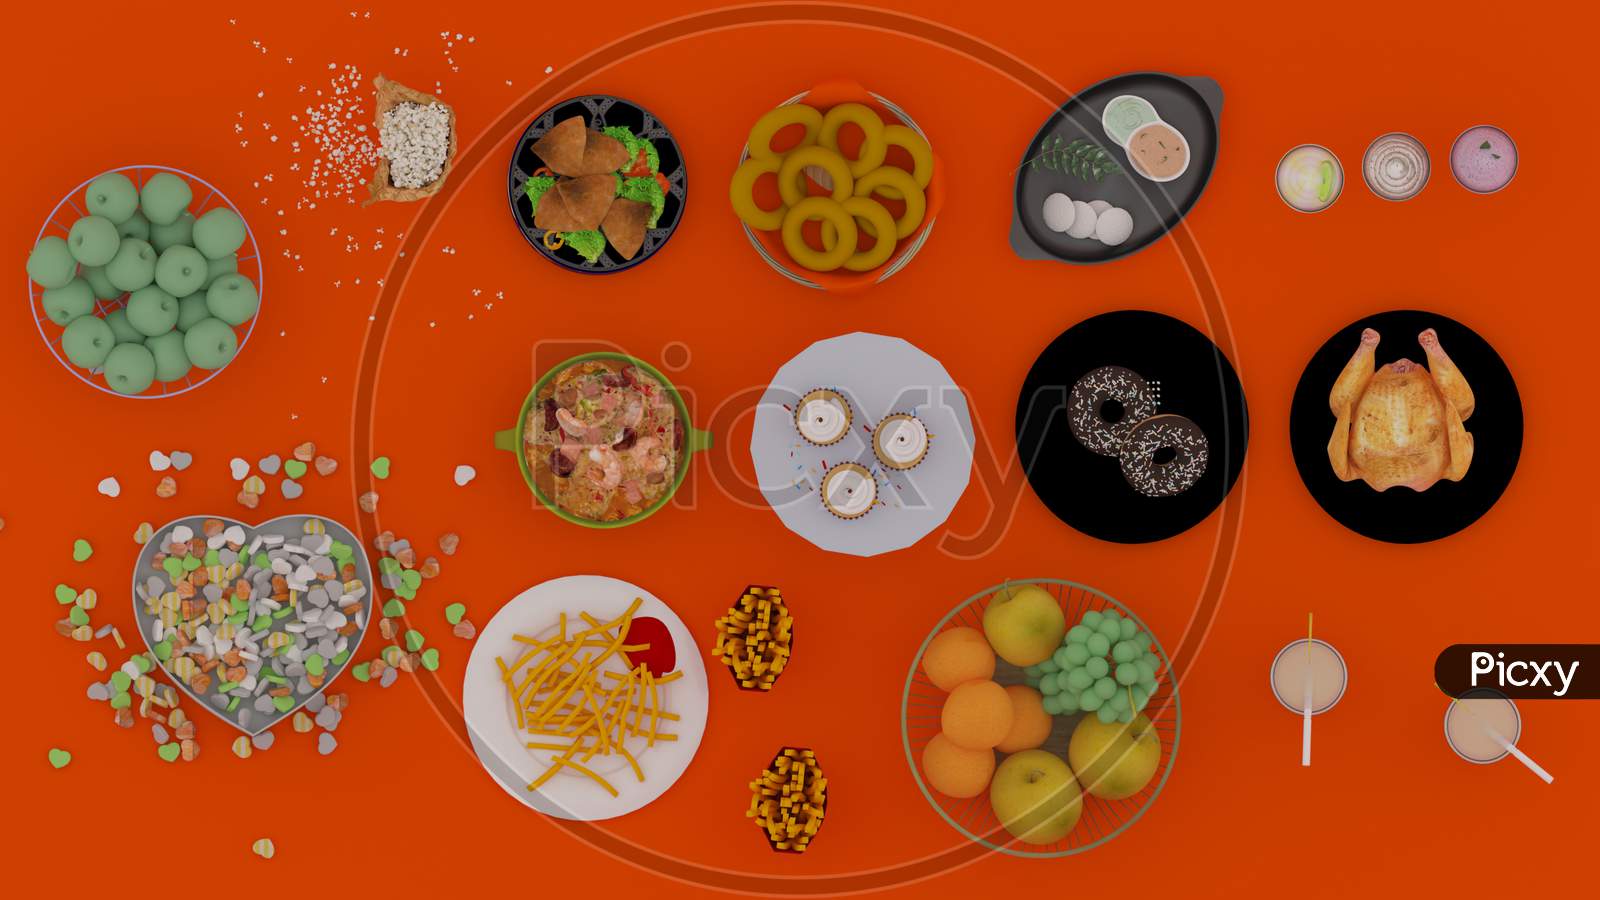 Healthy And Fast Food With Ice-Cream And Juice. Sweet Candy For Kids Celebration. 3D Rendered Foods Top View.